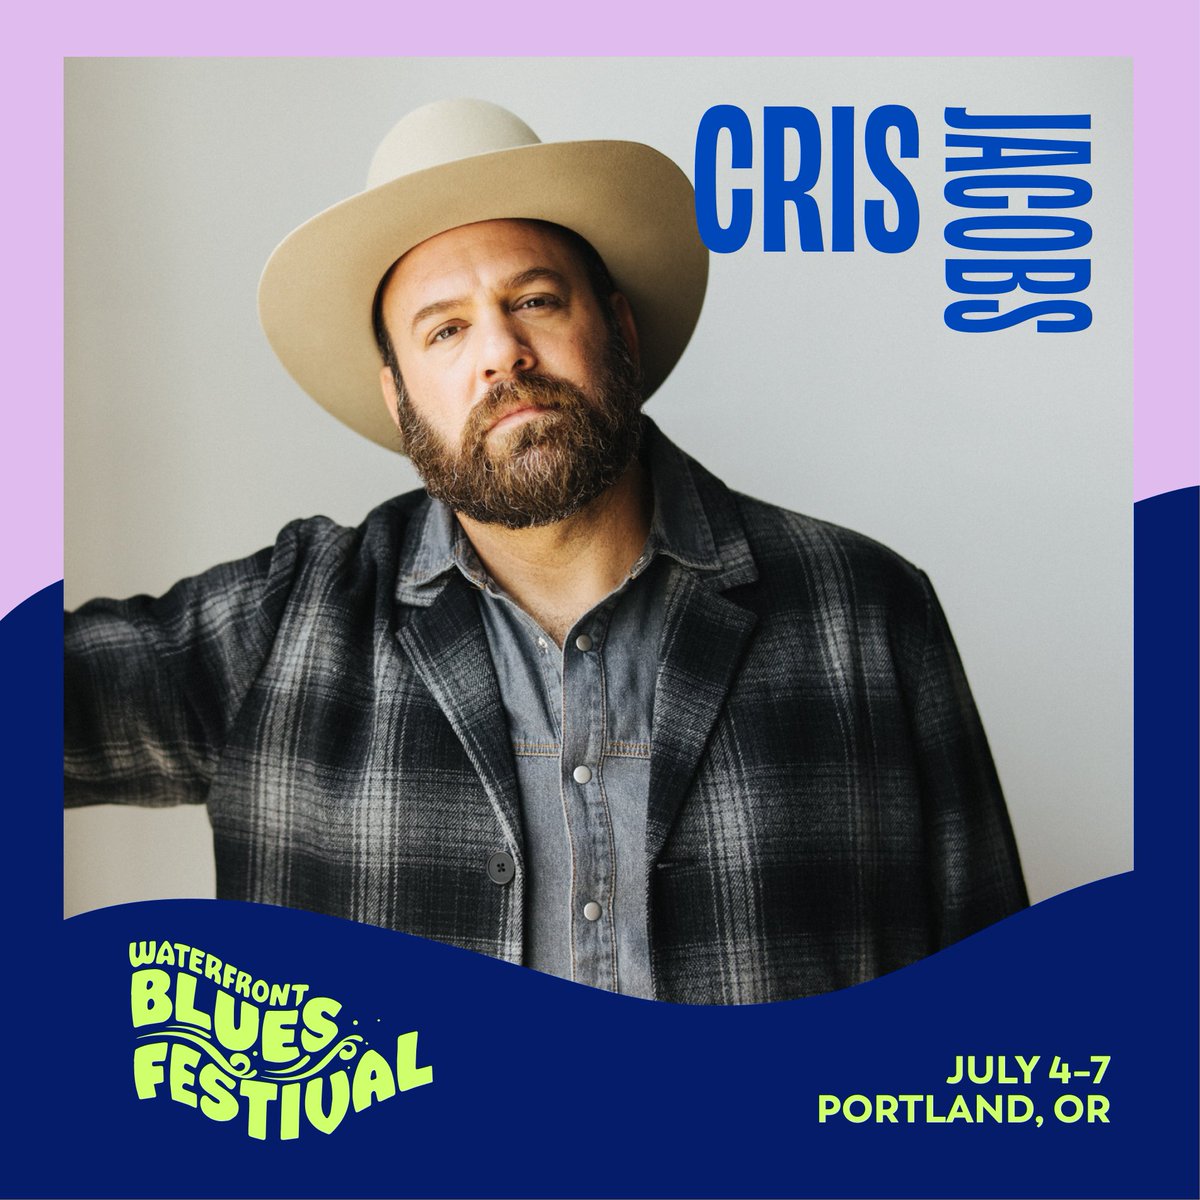 Oregon, I'll see you at @waterfrontblues July 4th - 7th in Portland!! Passes are on sale now at waterfrontbluesfest.com